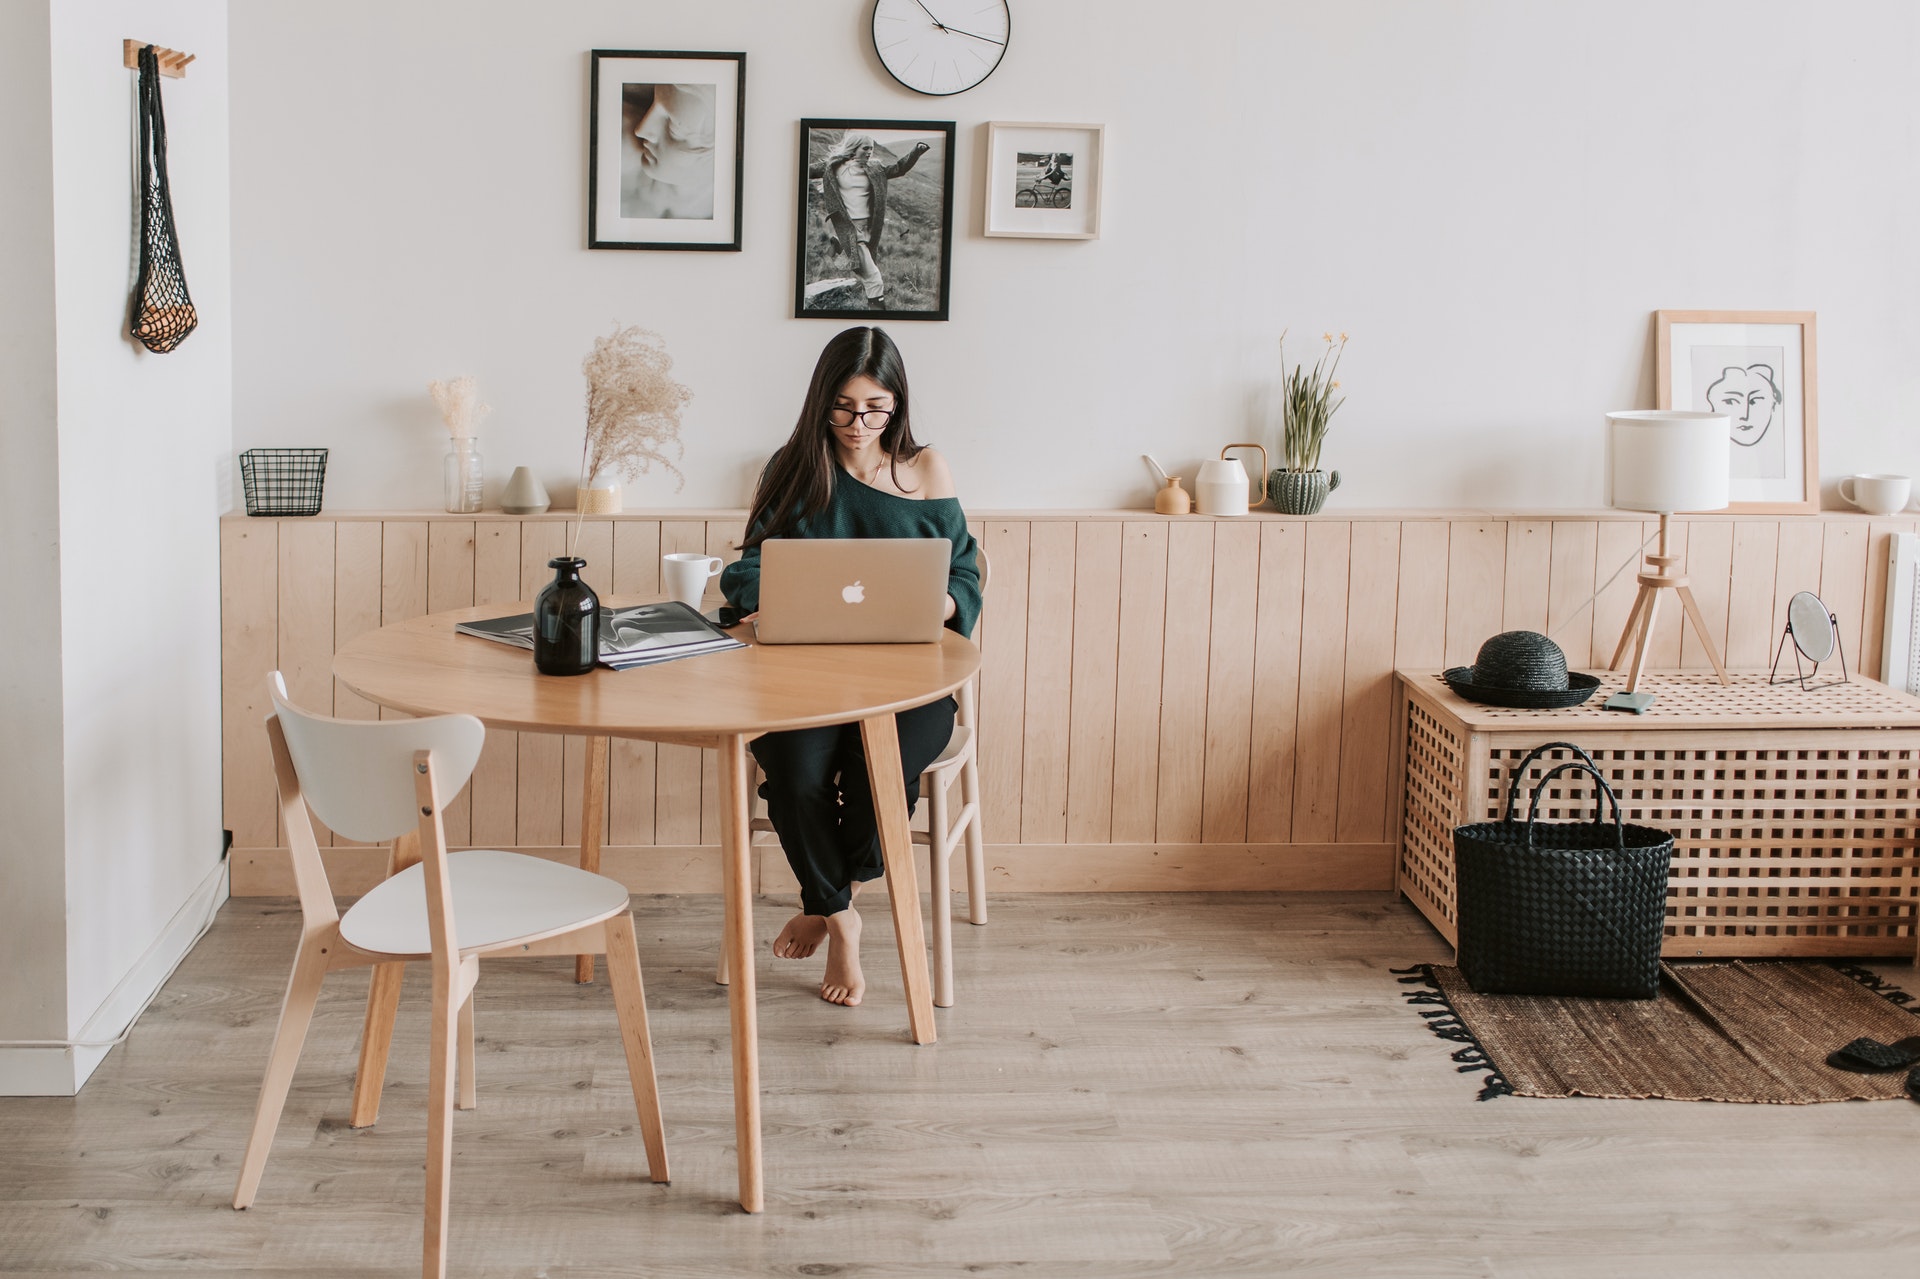 7 Everyday Remote Work Challenges (With Tips to Overcome Them)